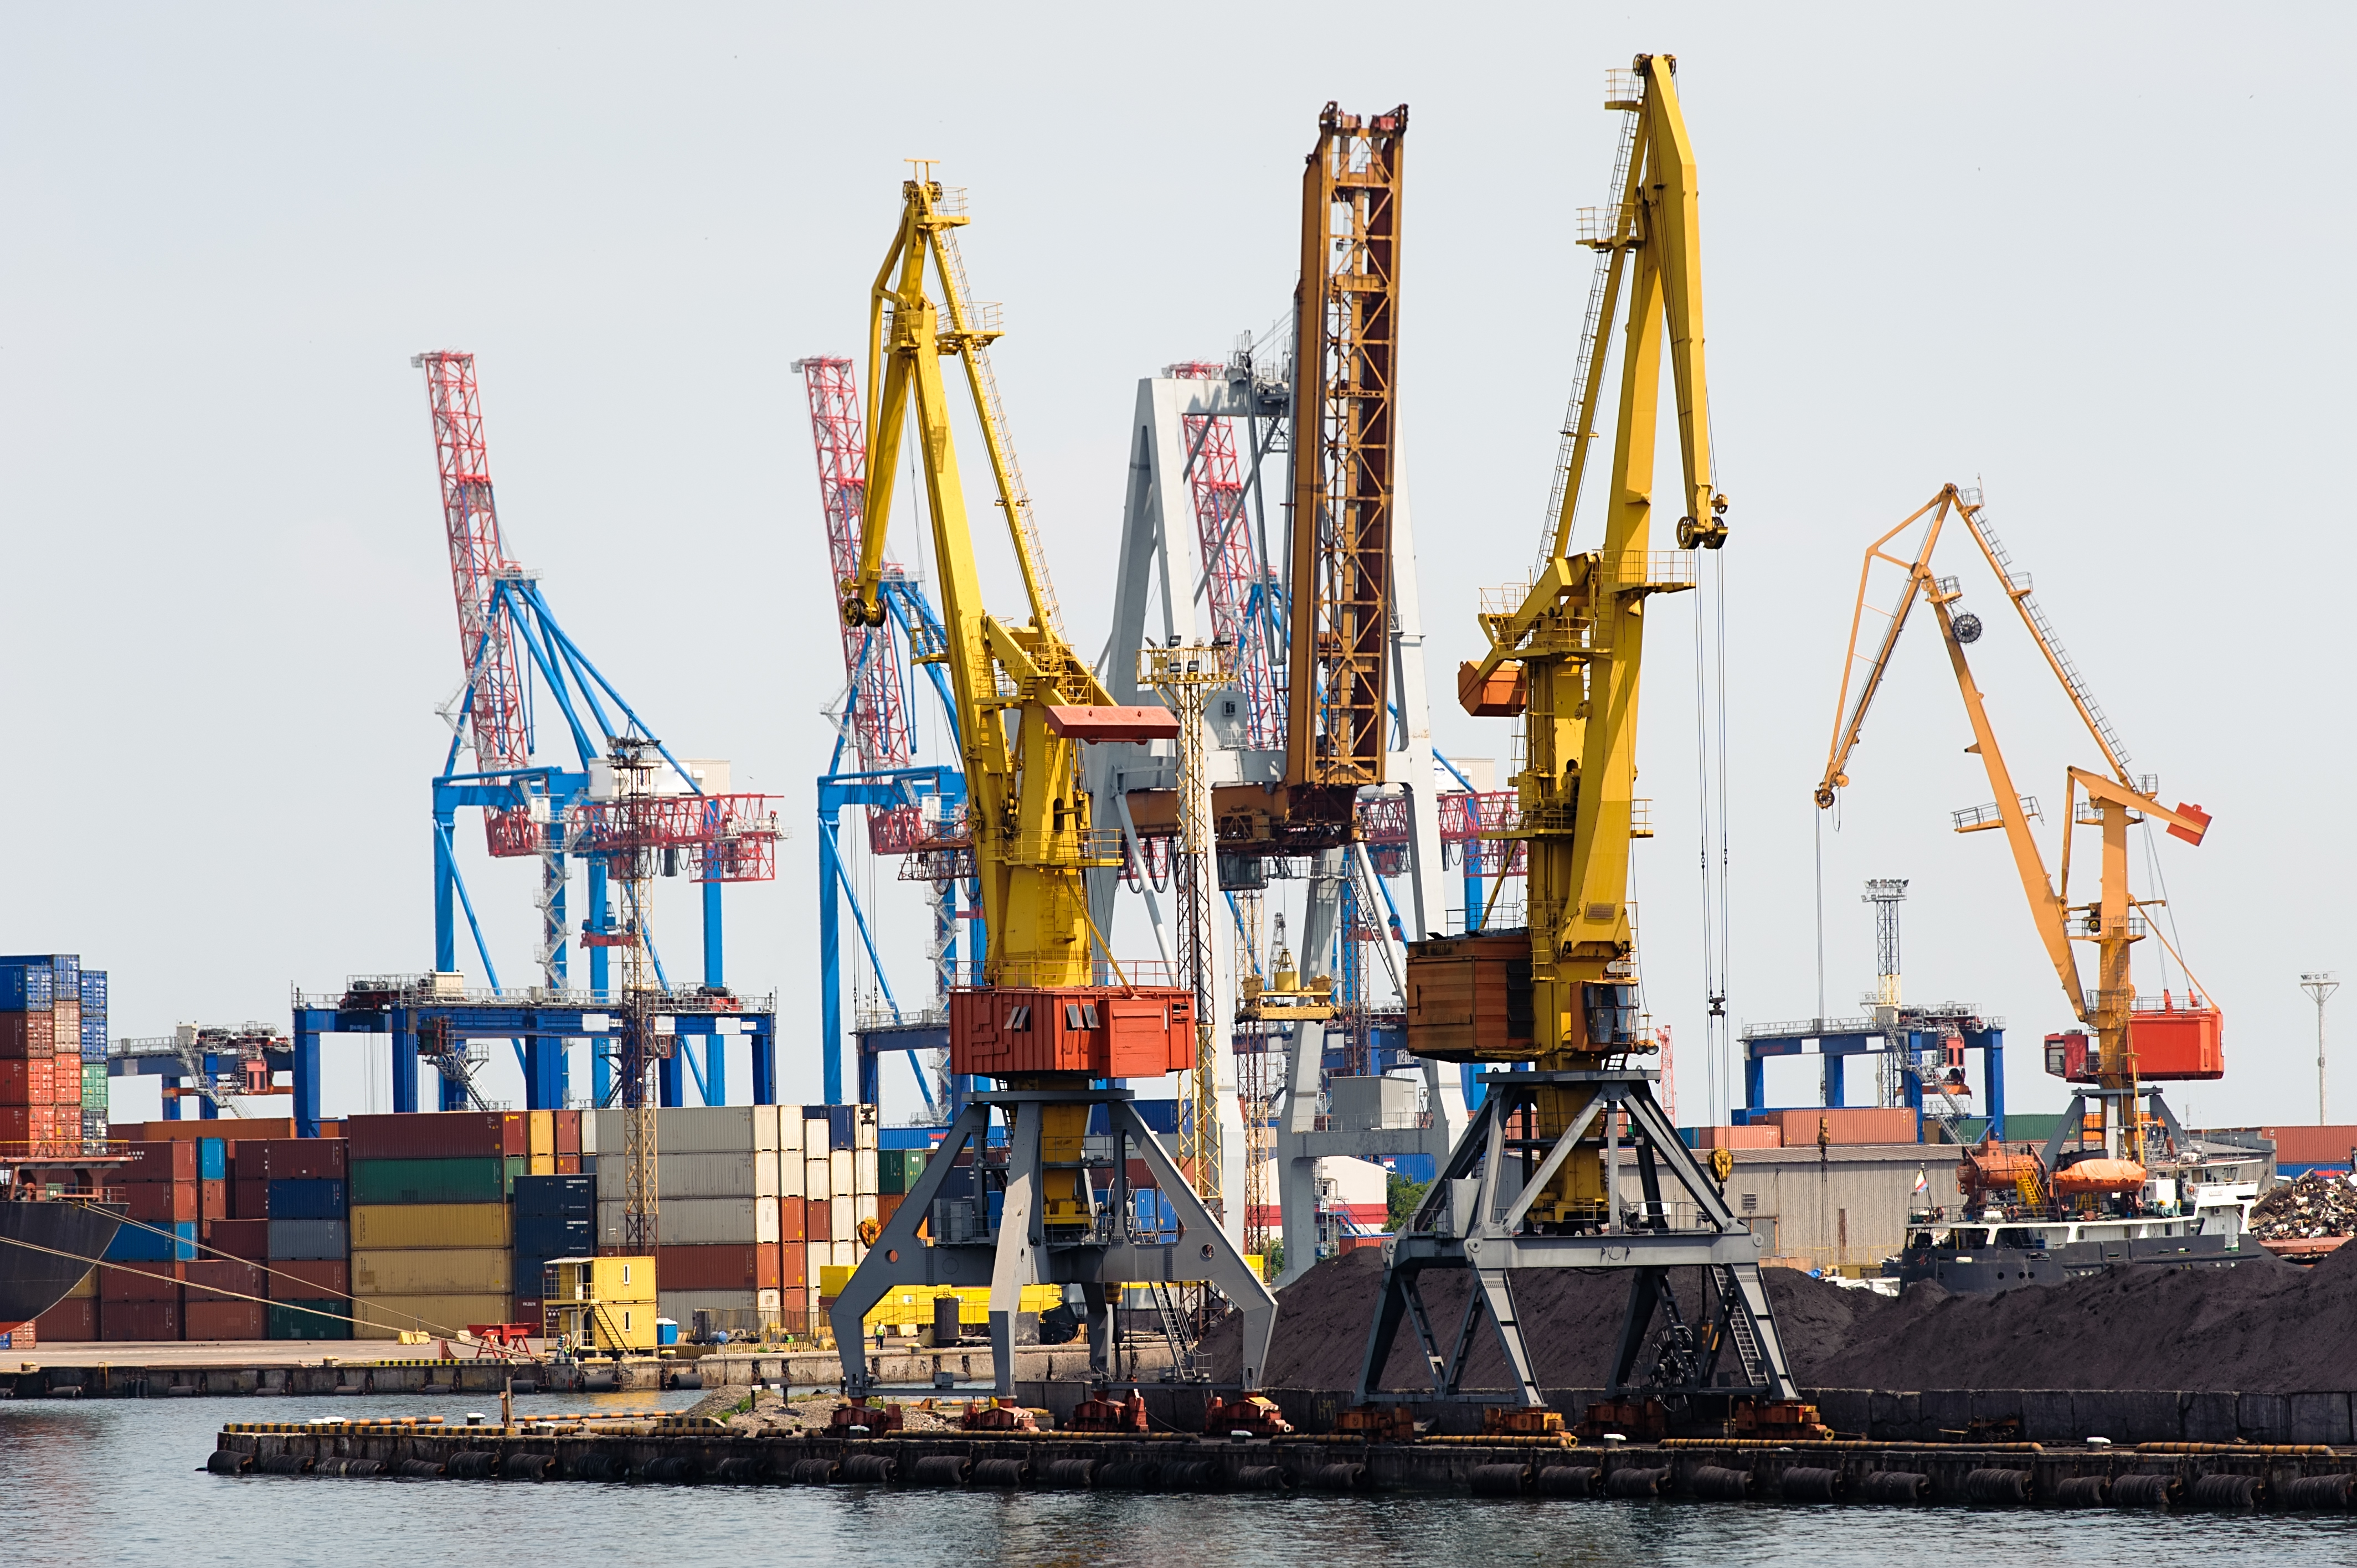 Cranes and containers on the shoreside of a port